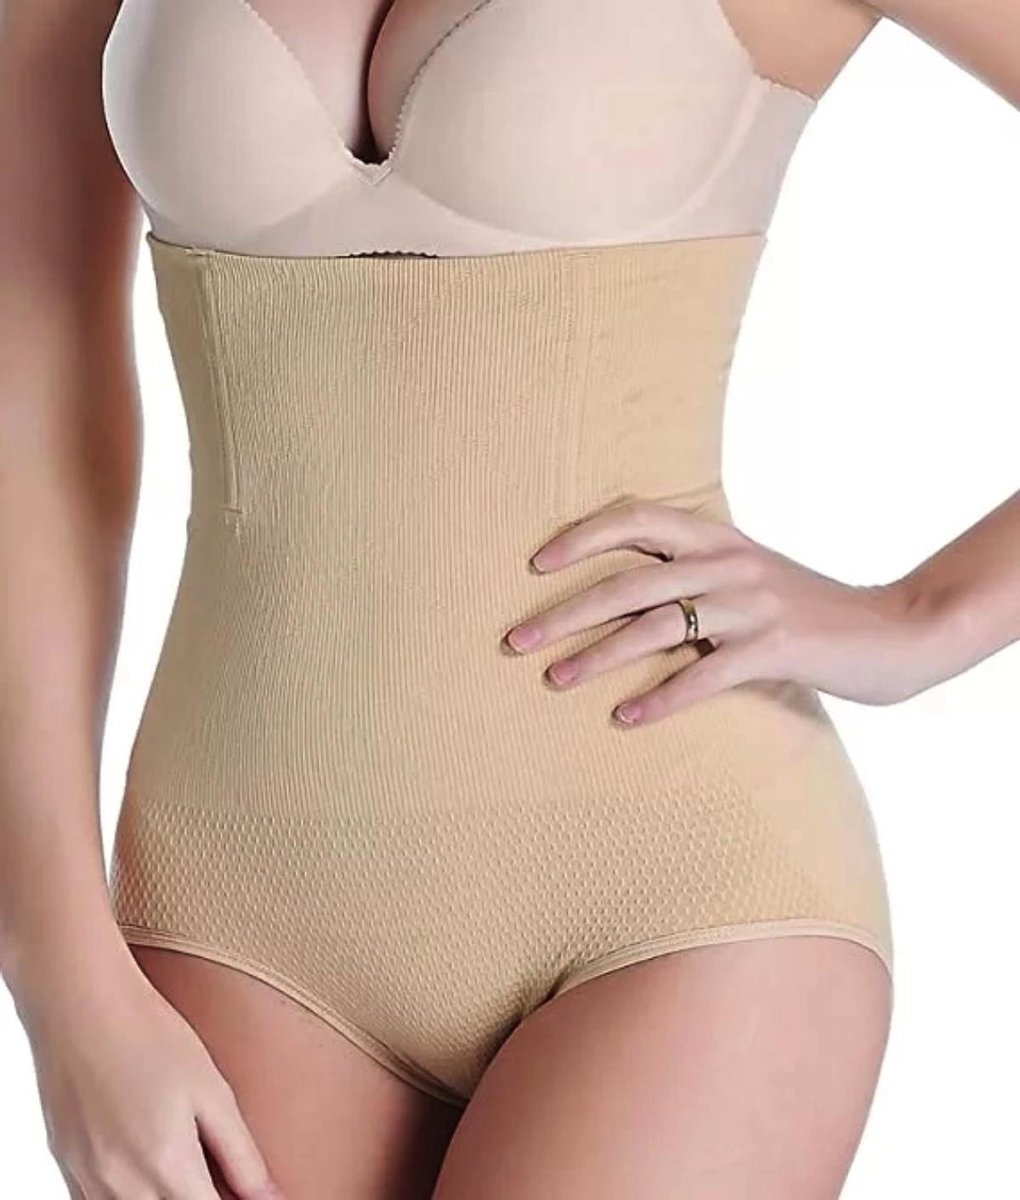 Hoge Tailleslip / High Waisted Panty Body shaper XS/S - nude/skin